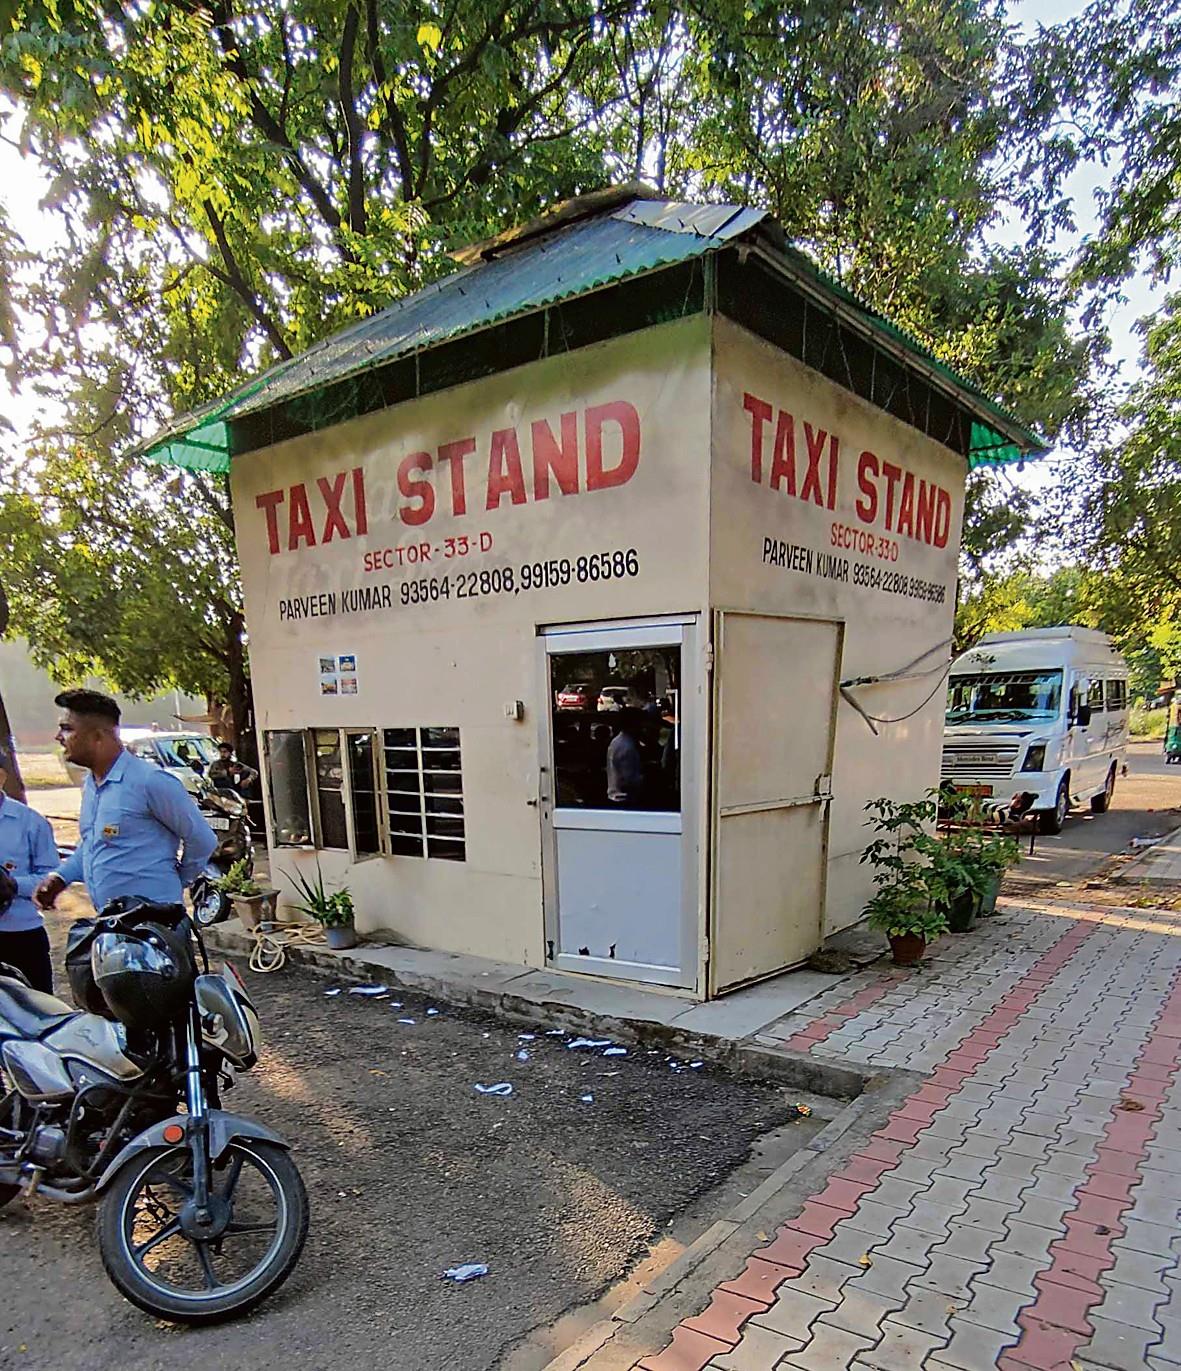 Day later, High Court tells Chandigarh to unlock taxi stands